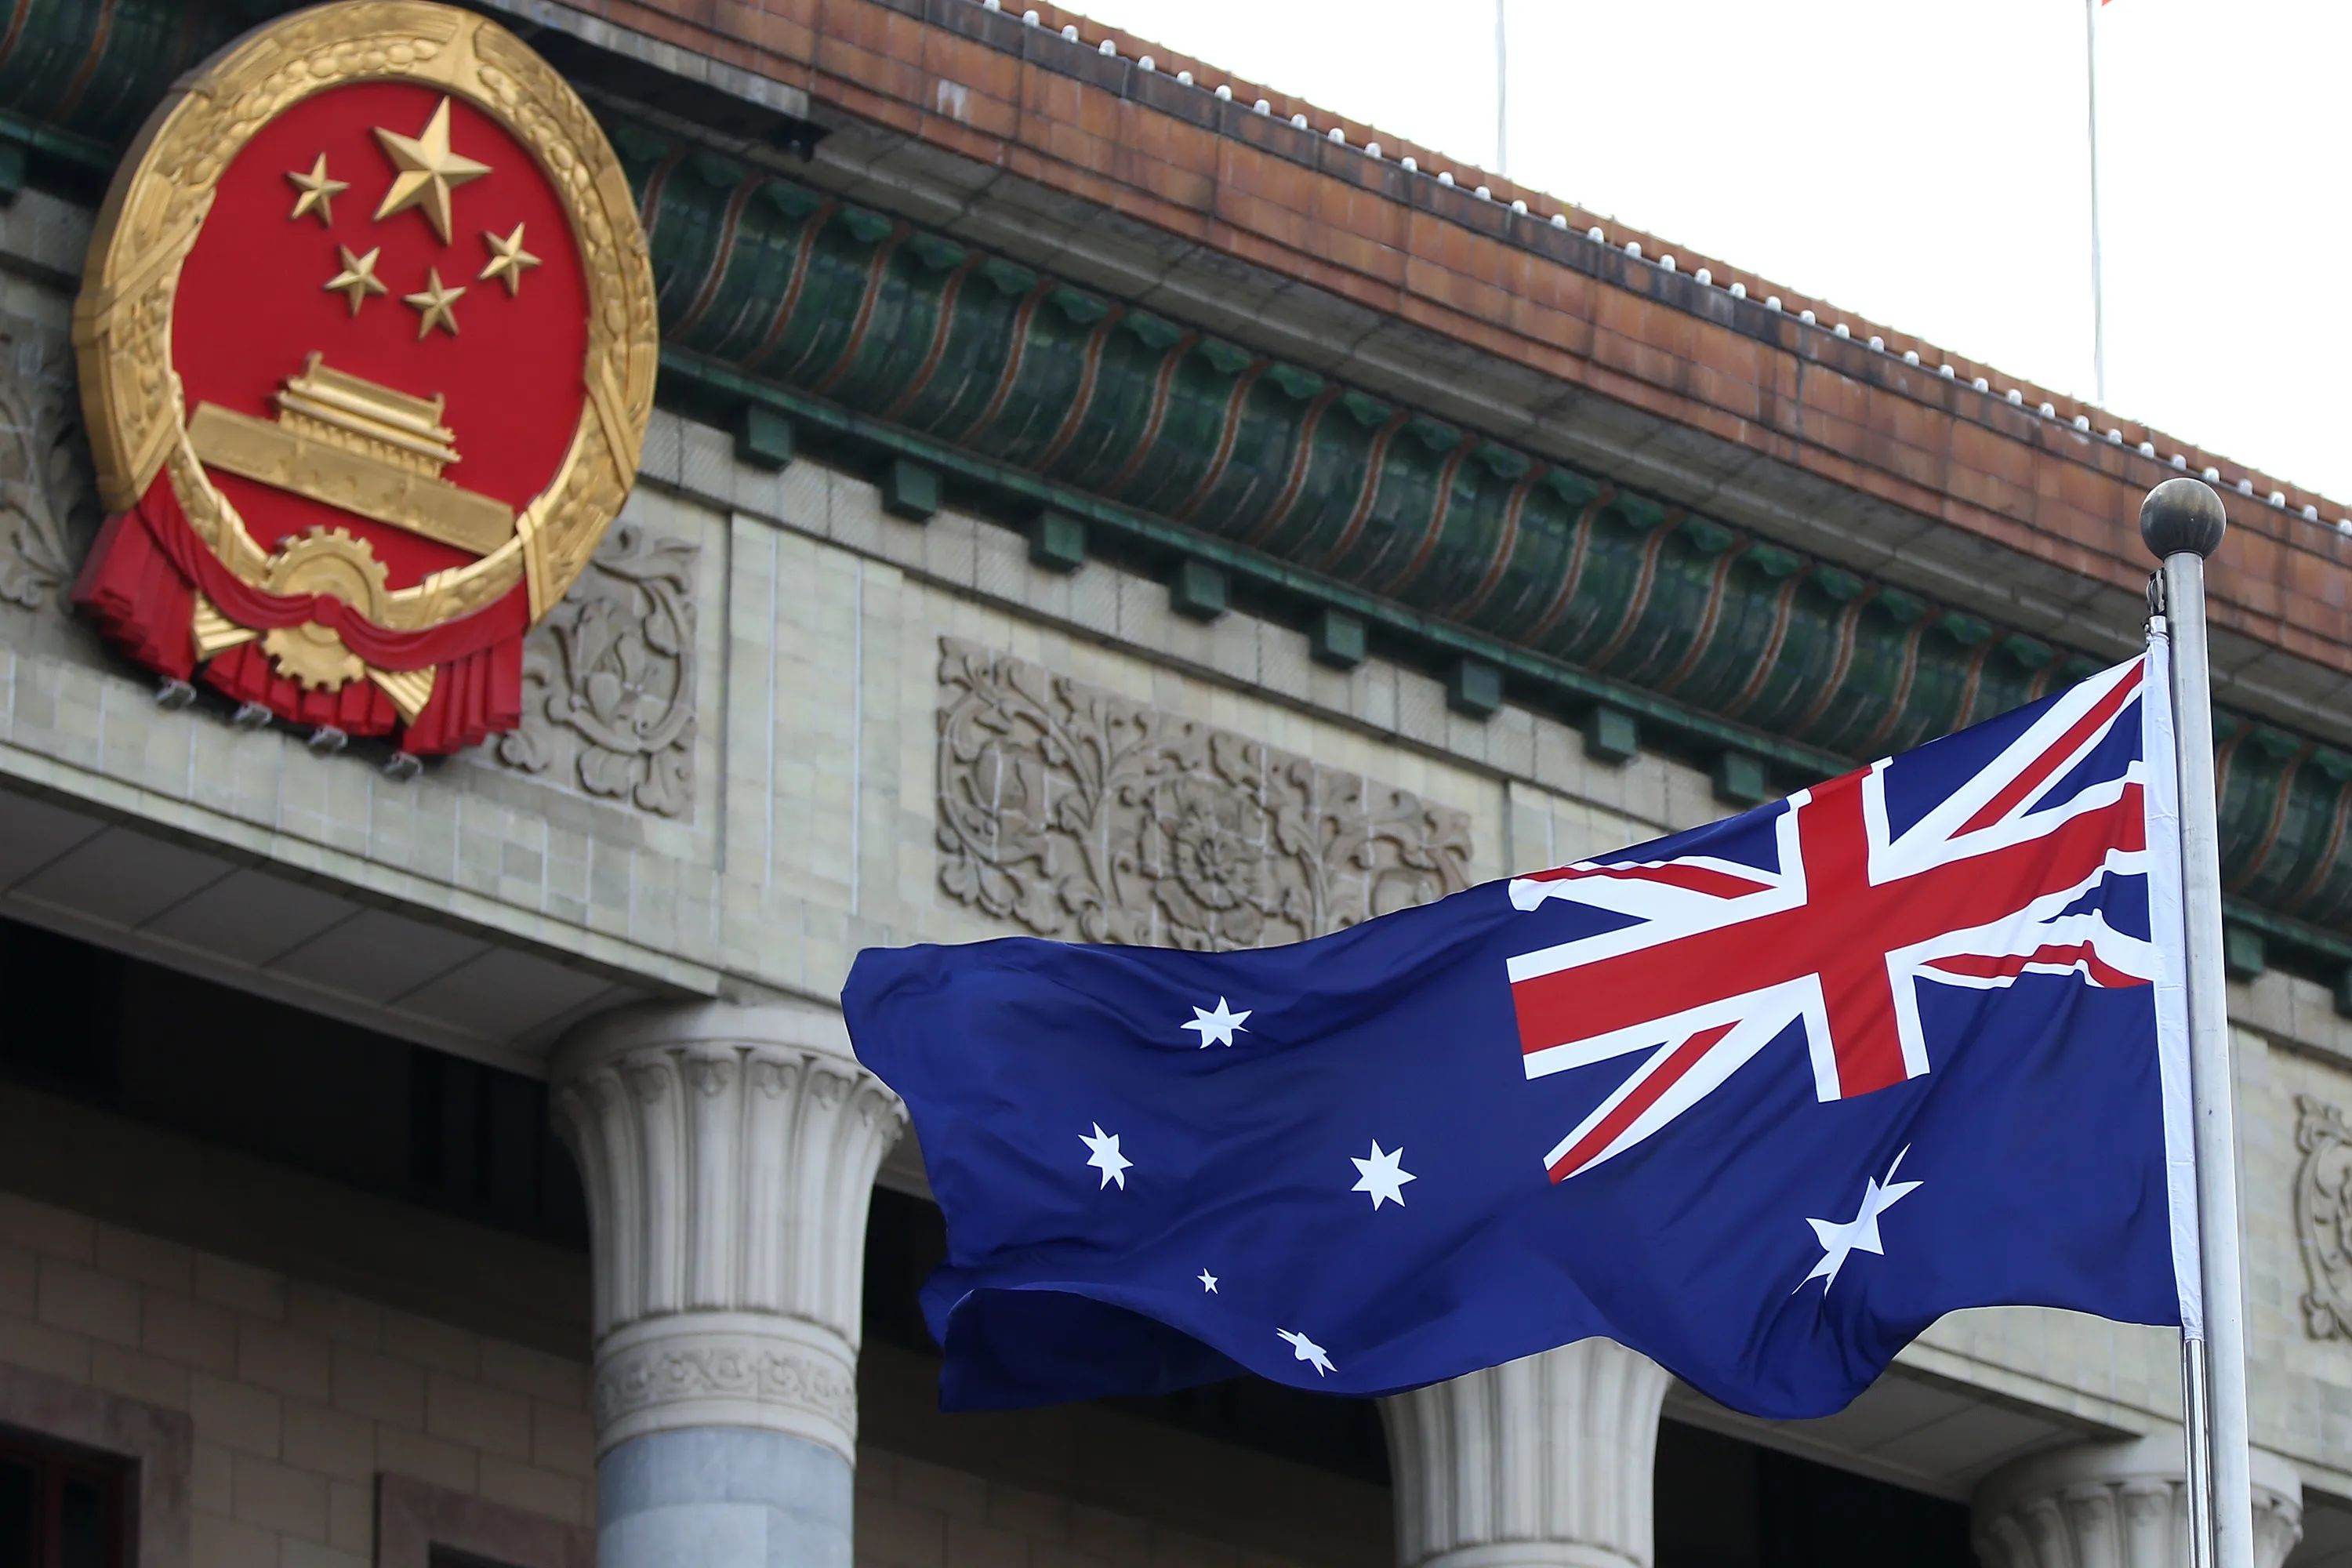 The ‘China Debate’ in Australia: Implications for the 2019 Federal elections and Australian foreign policy